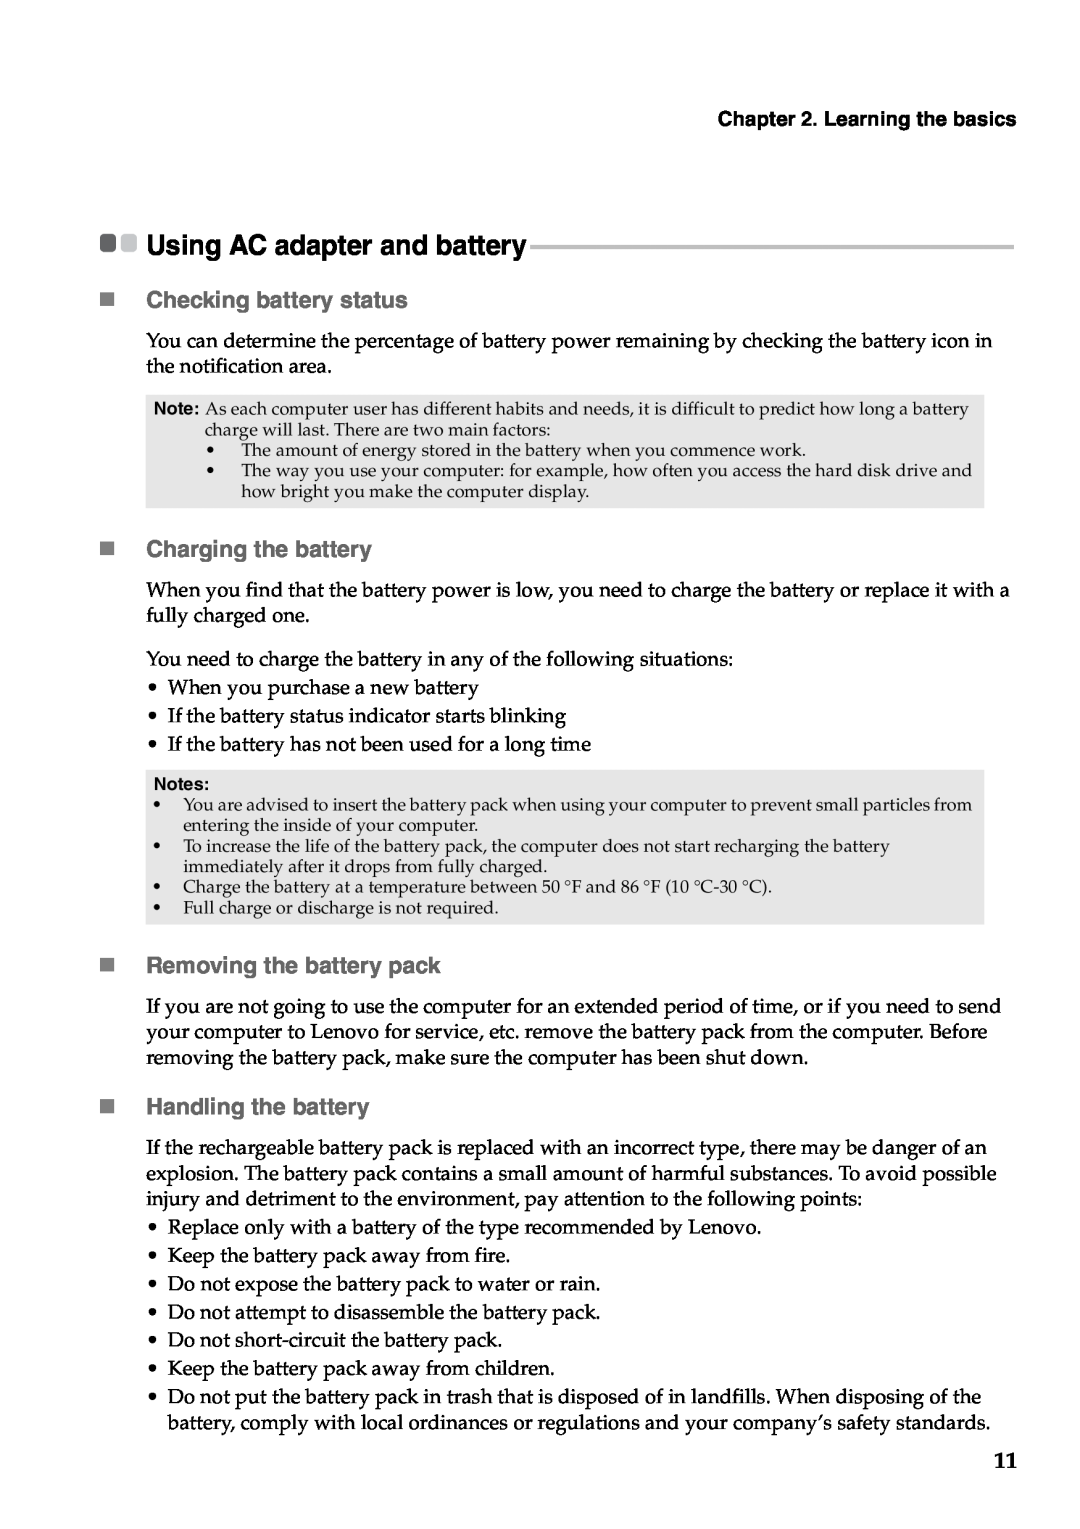 Lenovo Y480 Using AC adapter and battery, „ Checking battery status, „ Charging the battery, „ Removing the battery pack 